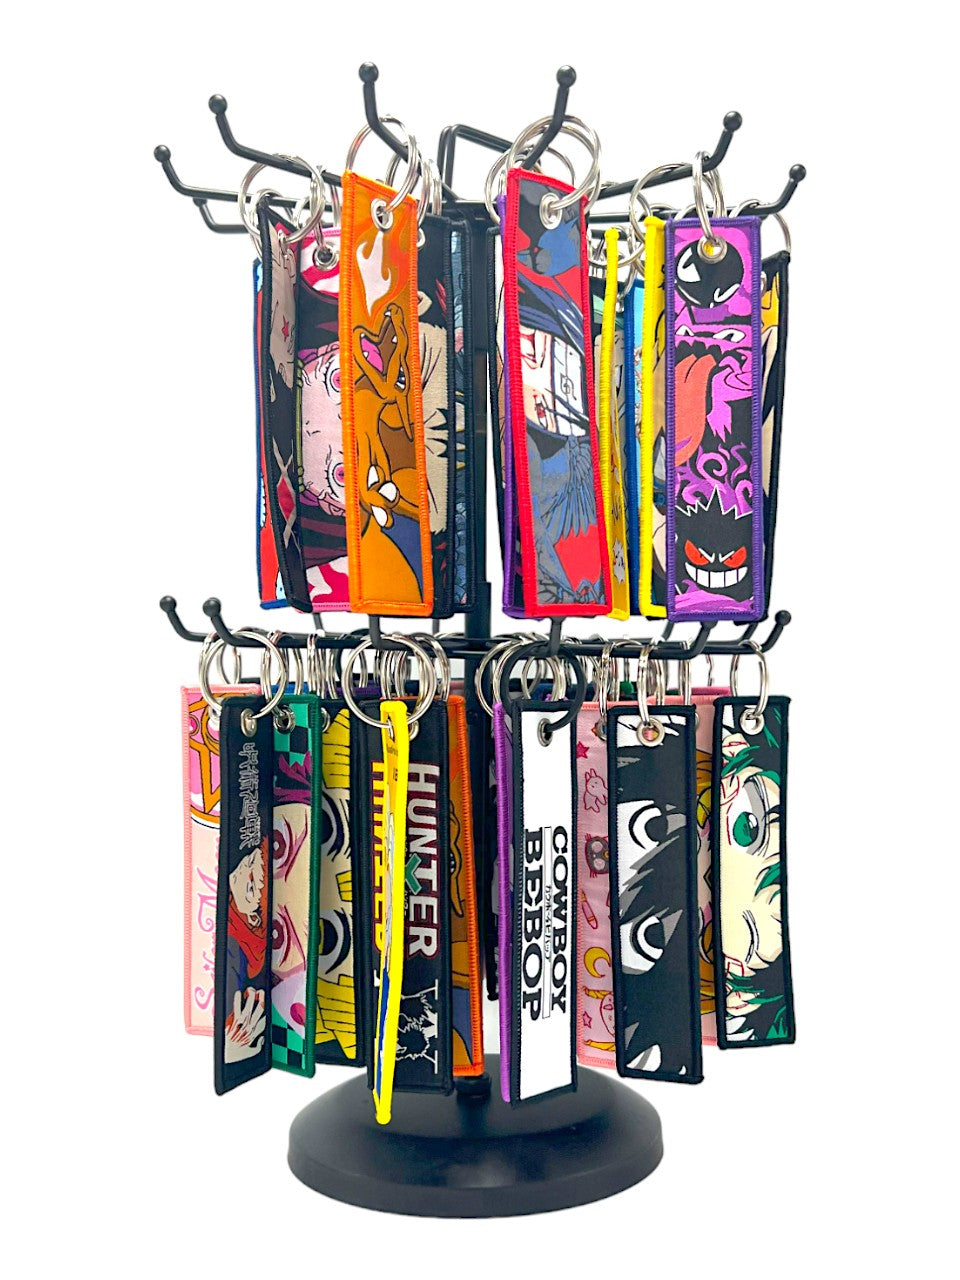 Anime Flat Keychains pack of 100 with Display